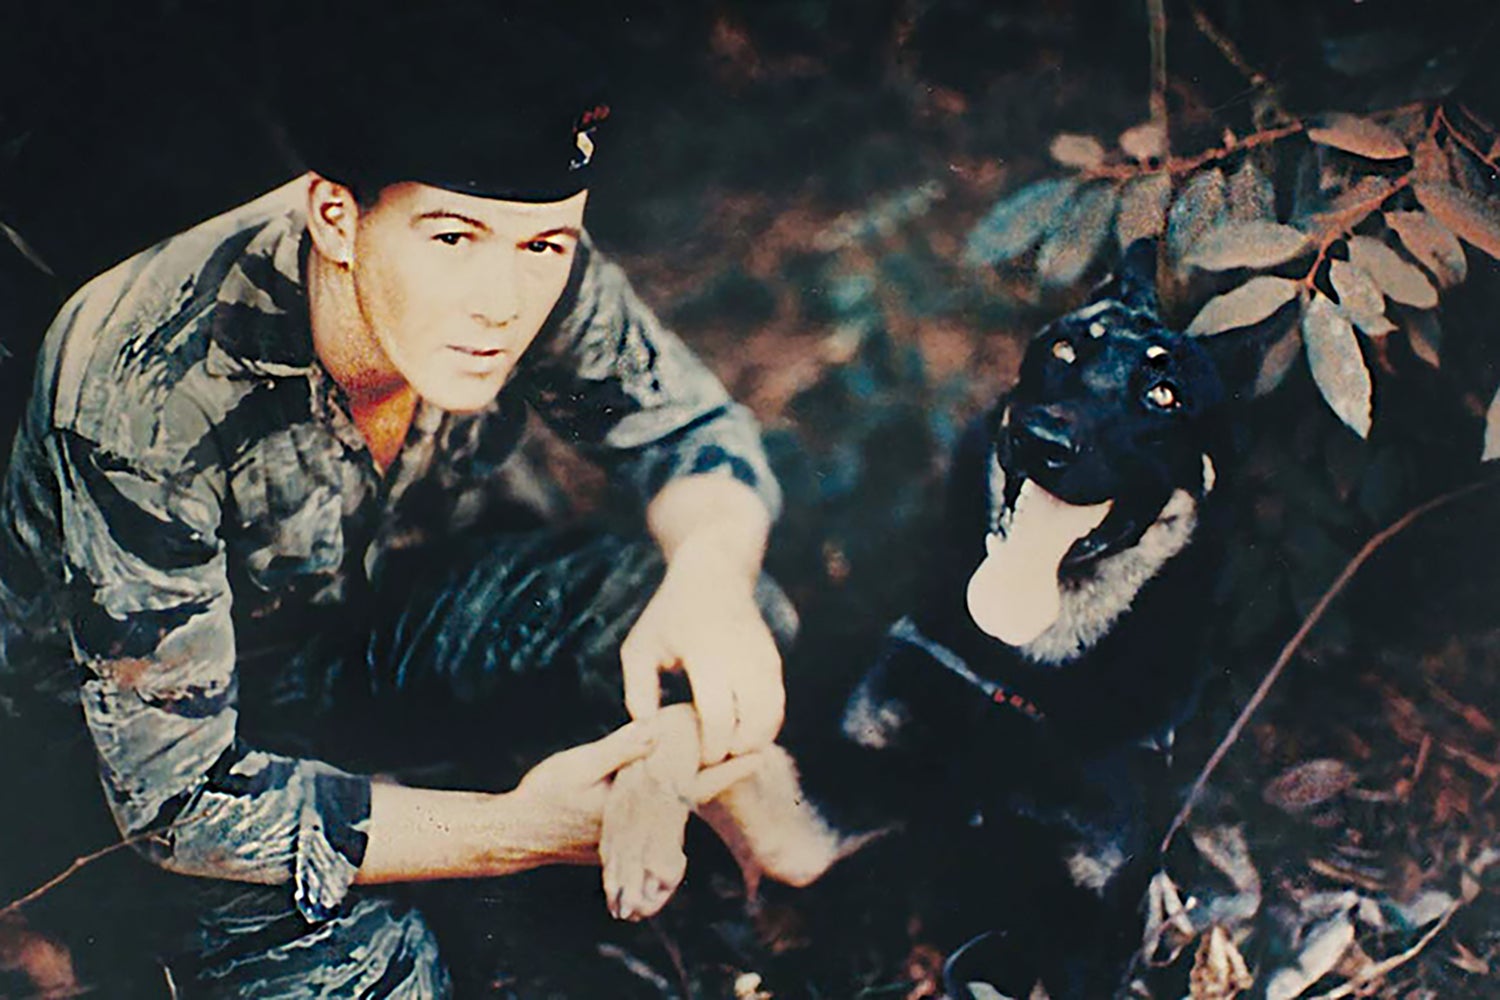 Sgt. David Hill, one of four members of a long-range reconnaissance team rescued by Taylor on June 18, 1968, is pictured with a military working dog in Vietnam. (Credit: Courtesy of Thomas McMahon)